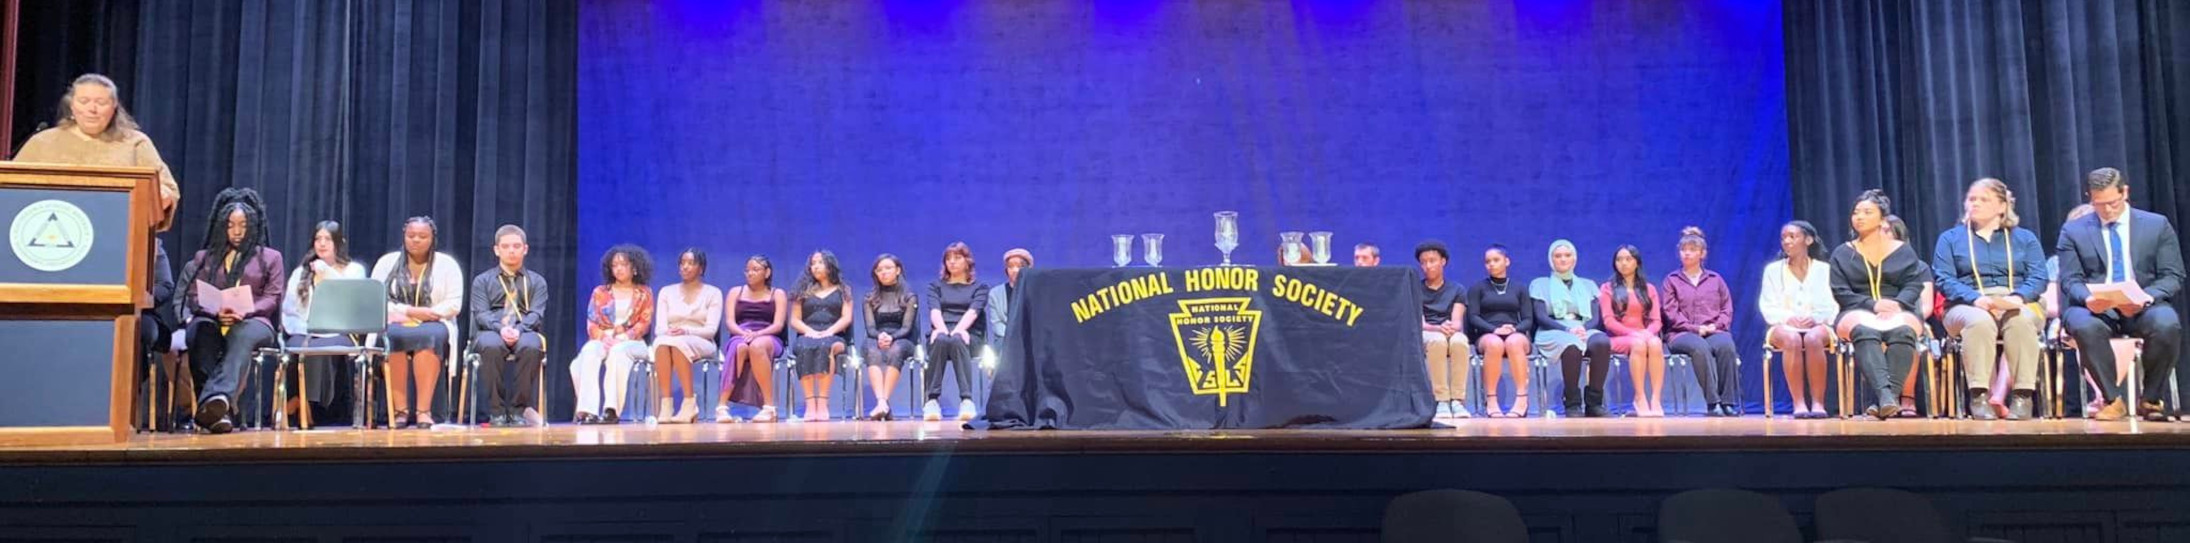 Pottstown High Inducts 14 as Honor Society Members